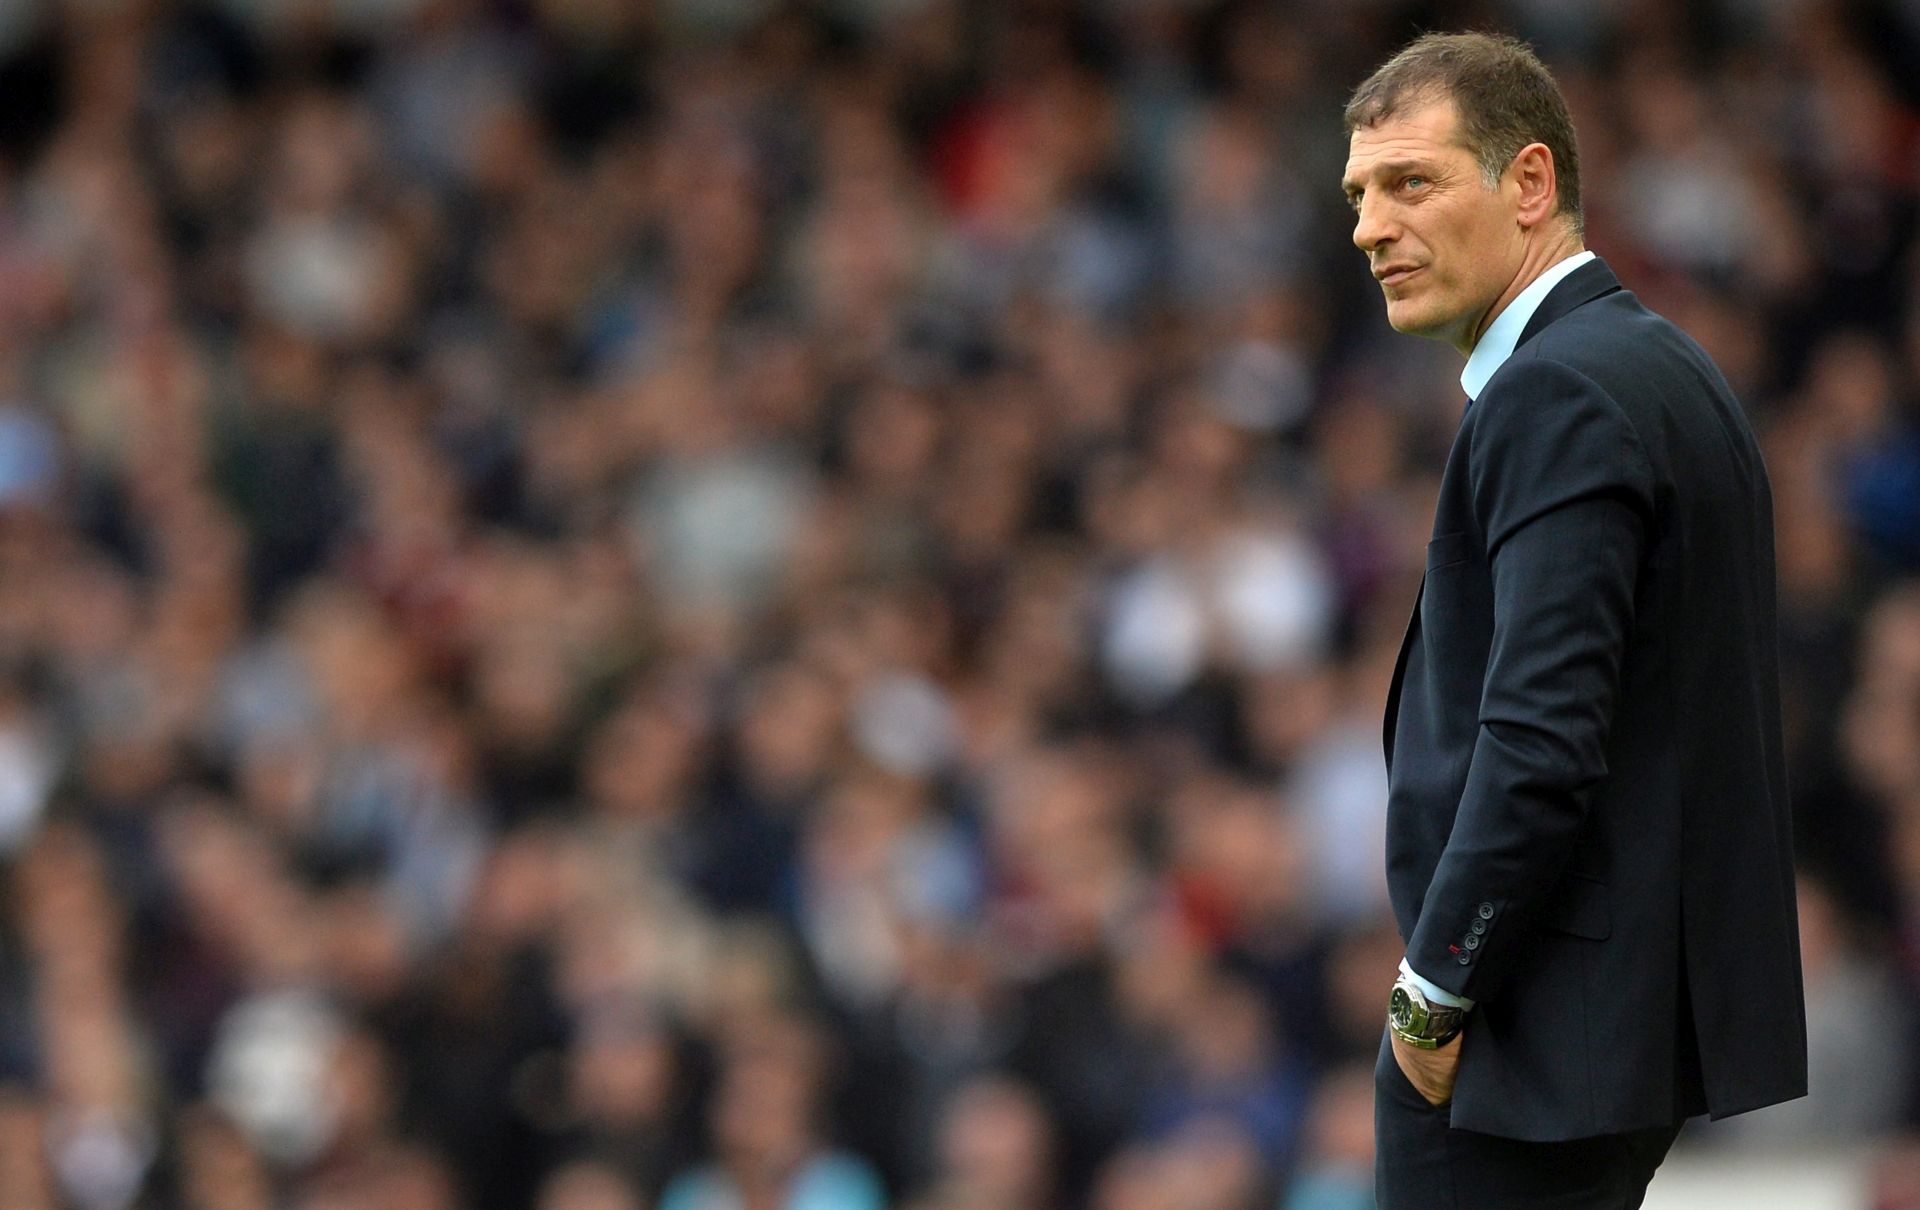 epa04993501 West Ham United's Manager Slaven Bilic reacts during the English Premier League soccer match between West Ham United and Chelsea at The Boleyn Ground in London, Britain, 24 October 2015.  EPA/HANNAH MCKAY EDITORIAL USE ONLY. No use with unauthorized audio, video, data, fixture lists, club/league logos or 'live' services. Online in-match use limited to 75 images, no video emulation. No use in betting, games or single club/league/player publications